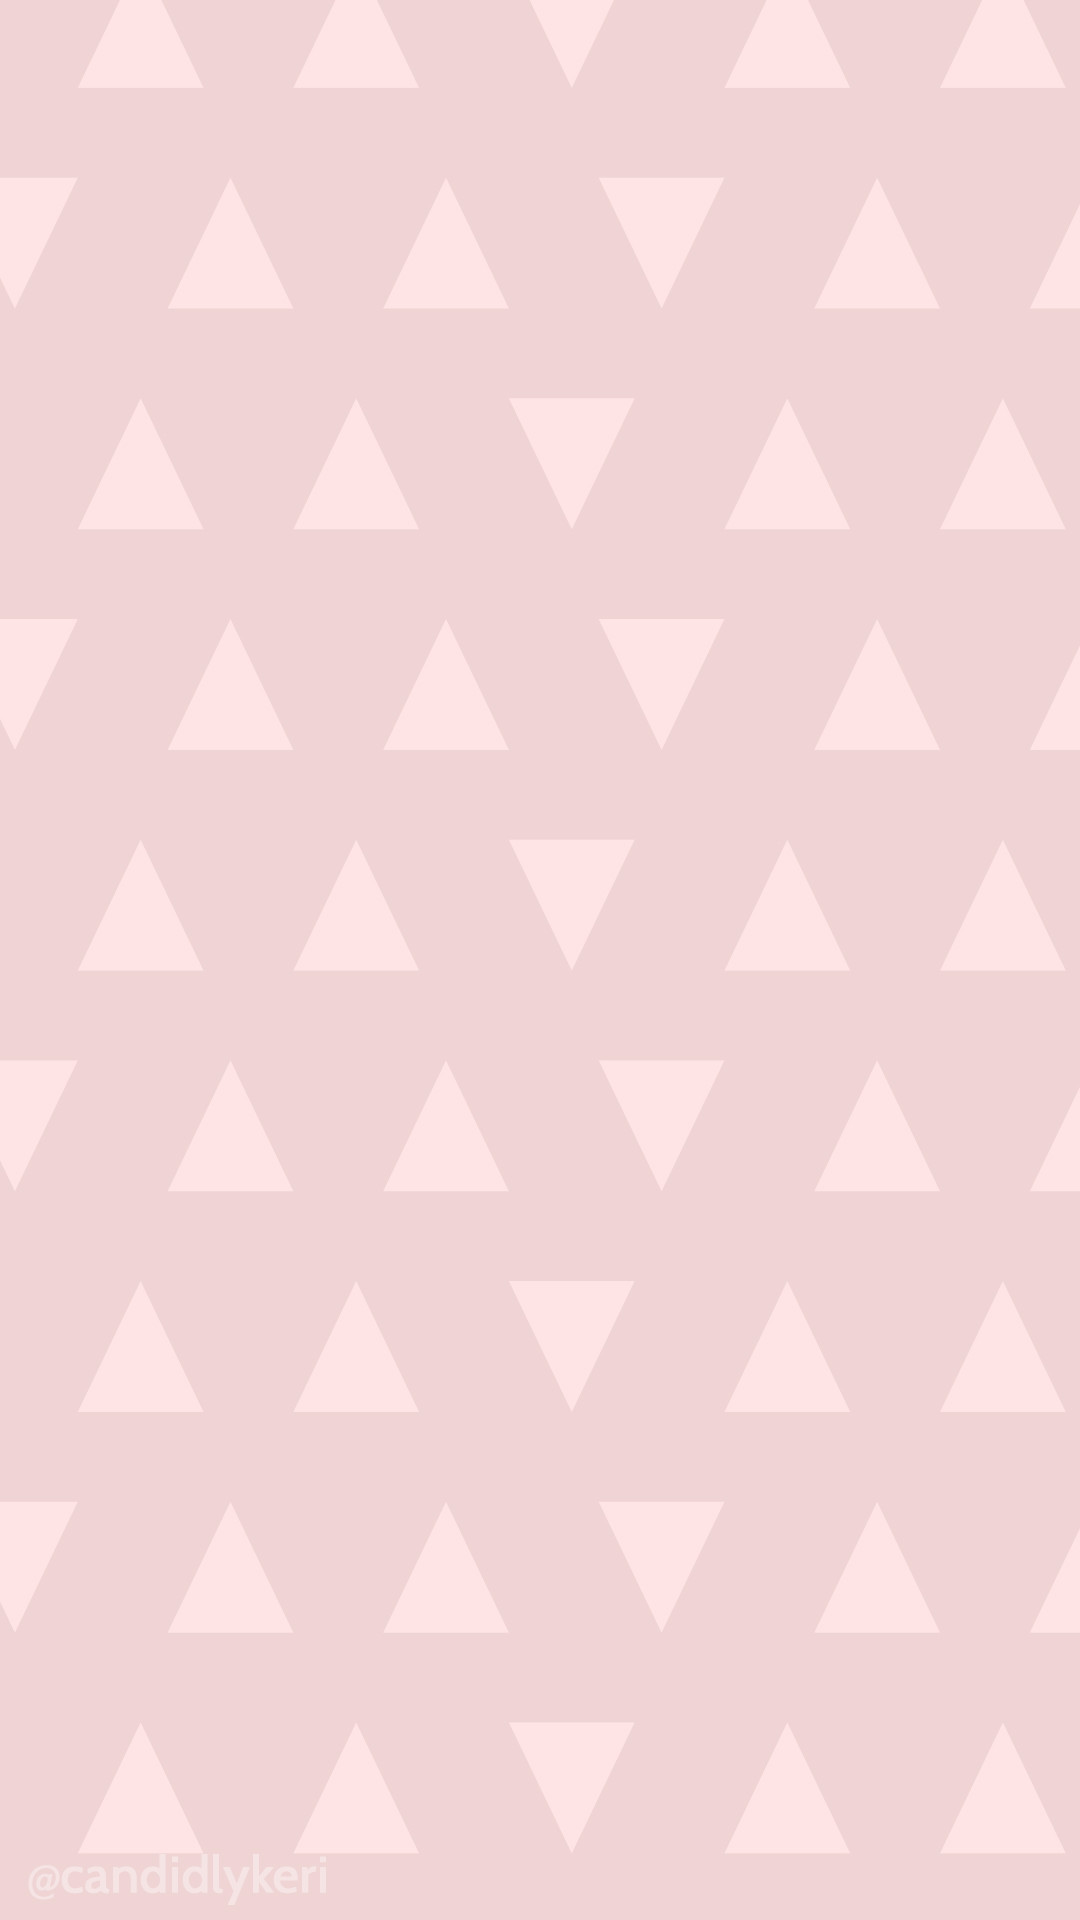 1080x1920 Pink pretty triangle background wallpaper you can download for free on the  blog! For any